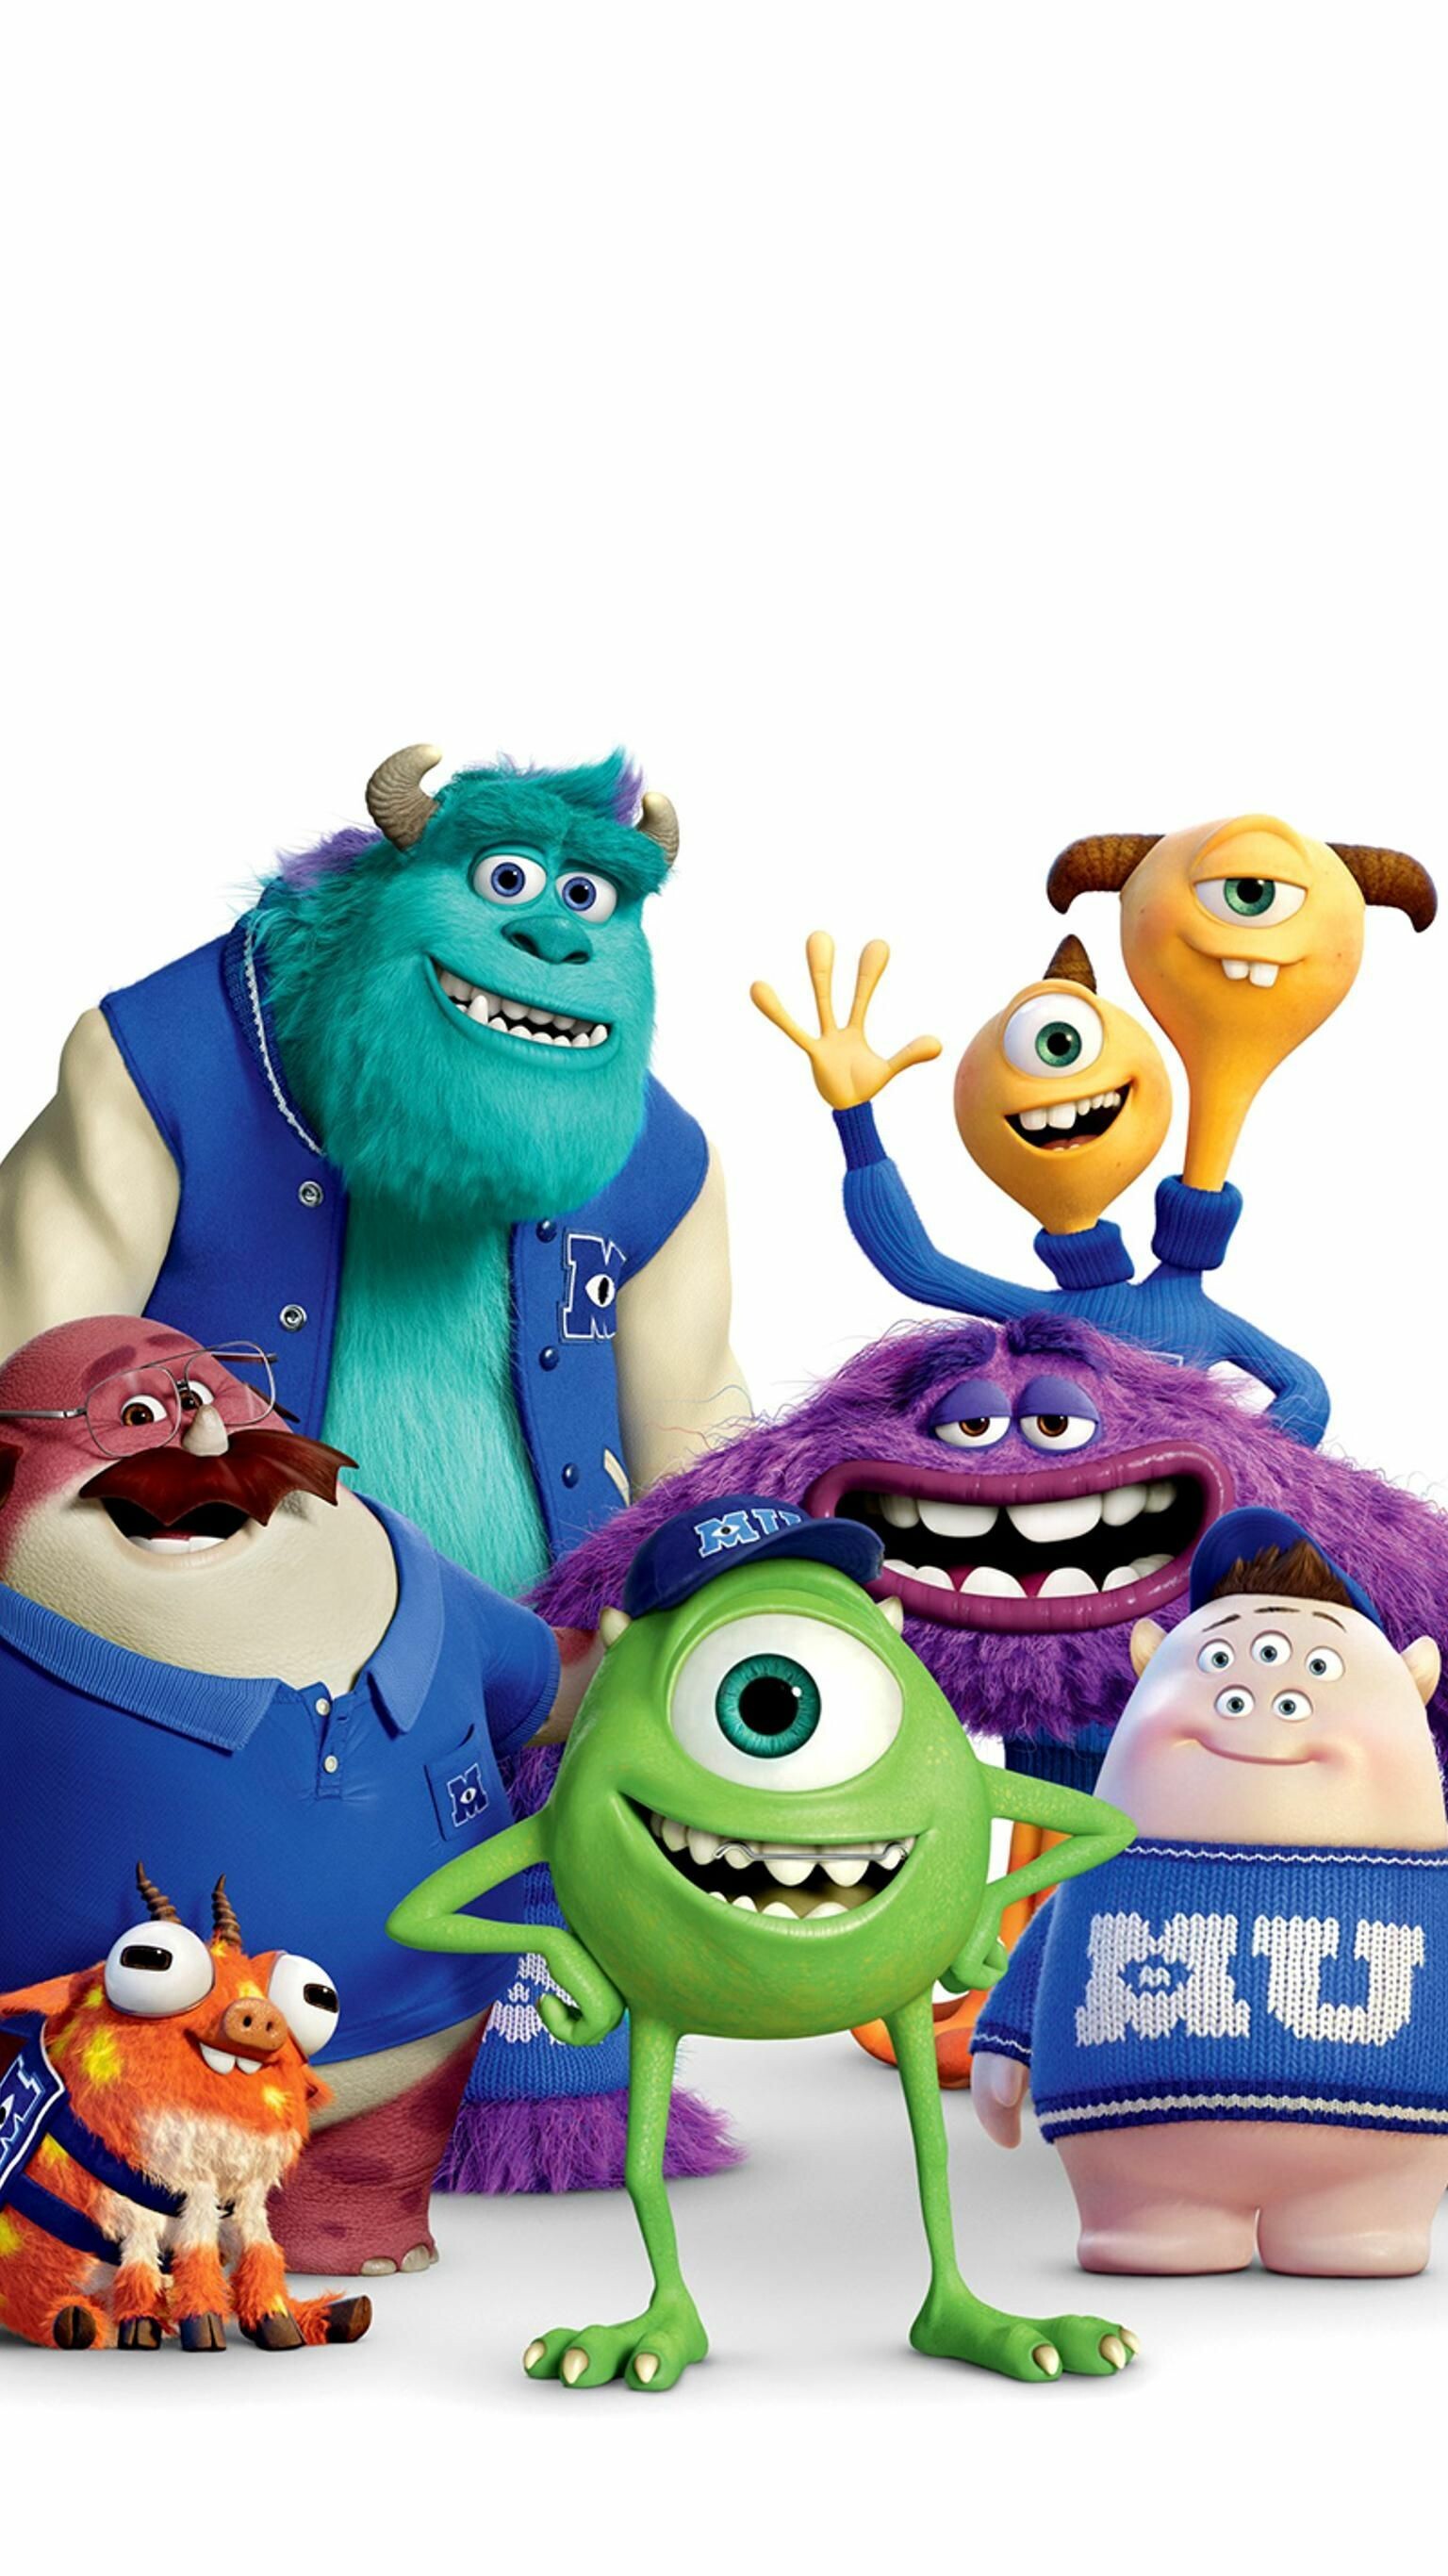 Monsters, Inc.: Sulley and his wisecracking sidekick Mike Wazowski, The top scare team. 1540x2740 HD Background.